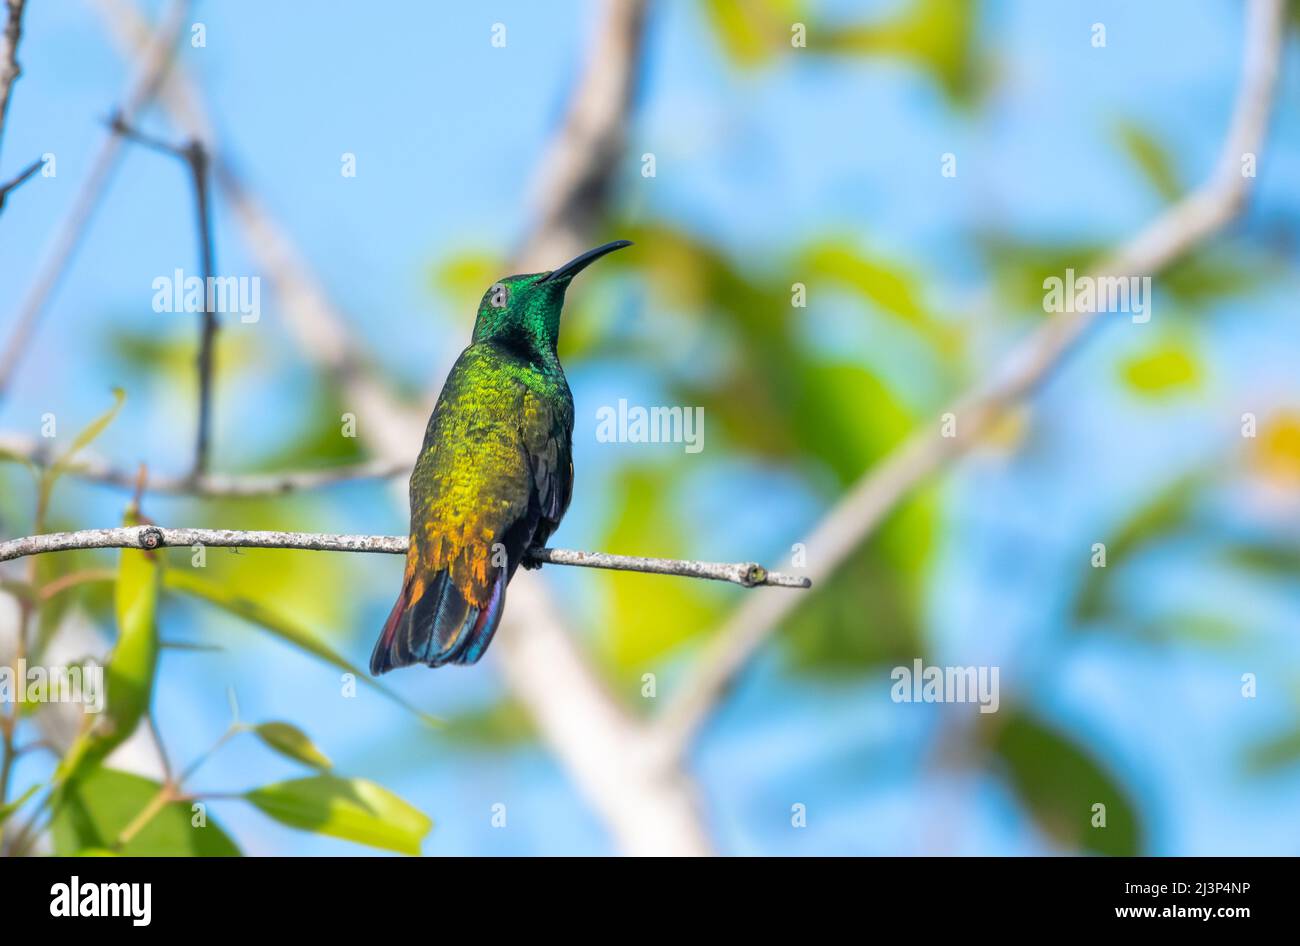 Male Green-throated Mango hummingbird, Anthracothorax viridigula, perched in the sunlight looking back at camera. Stock Photo